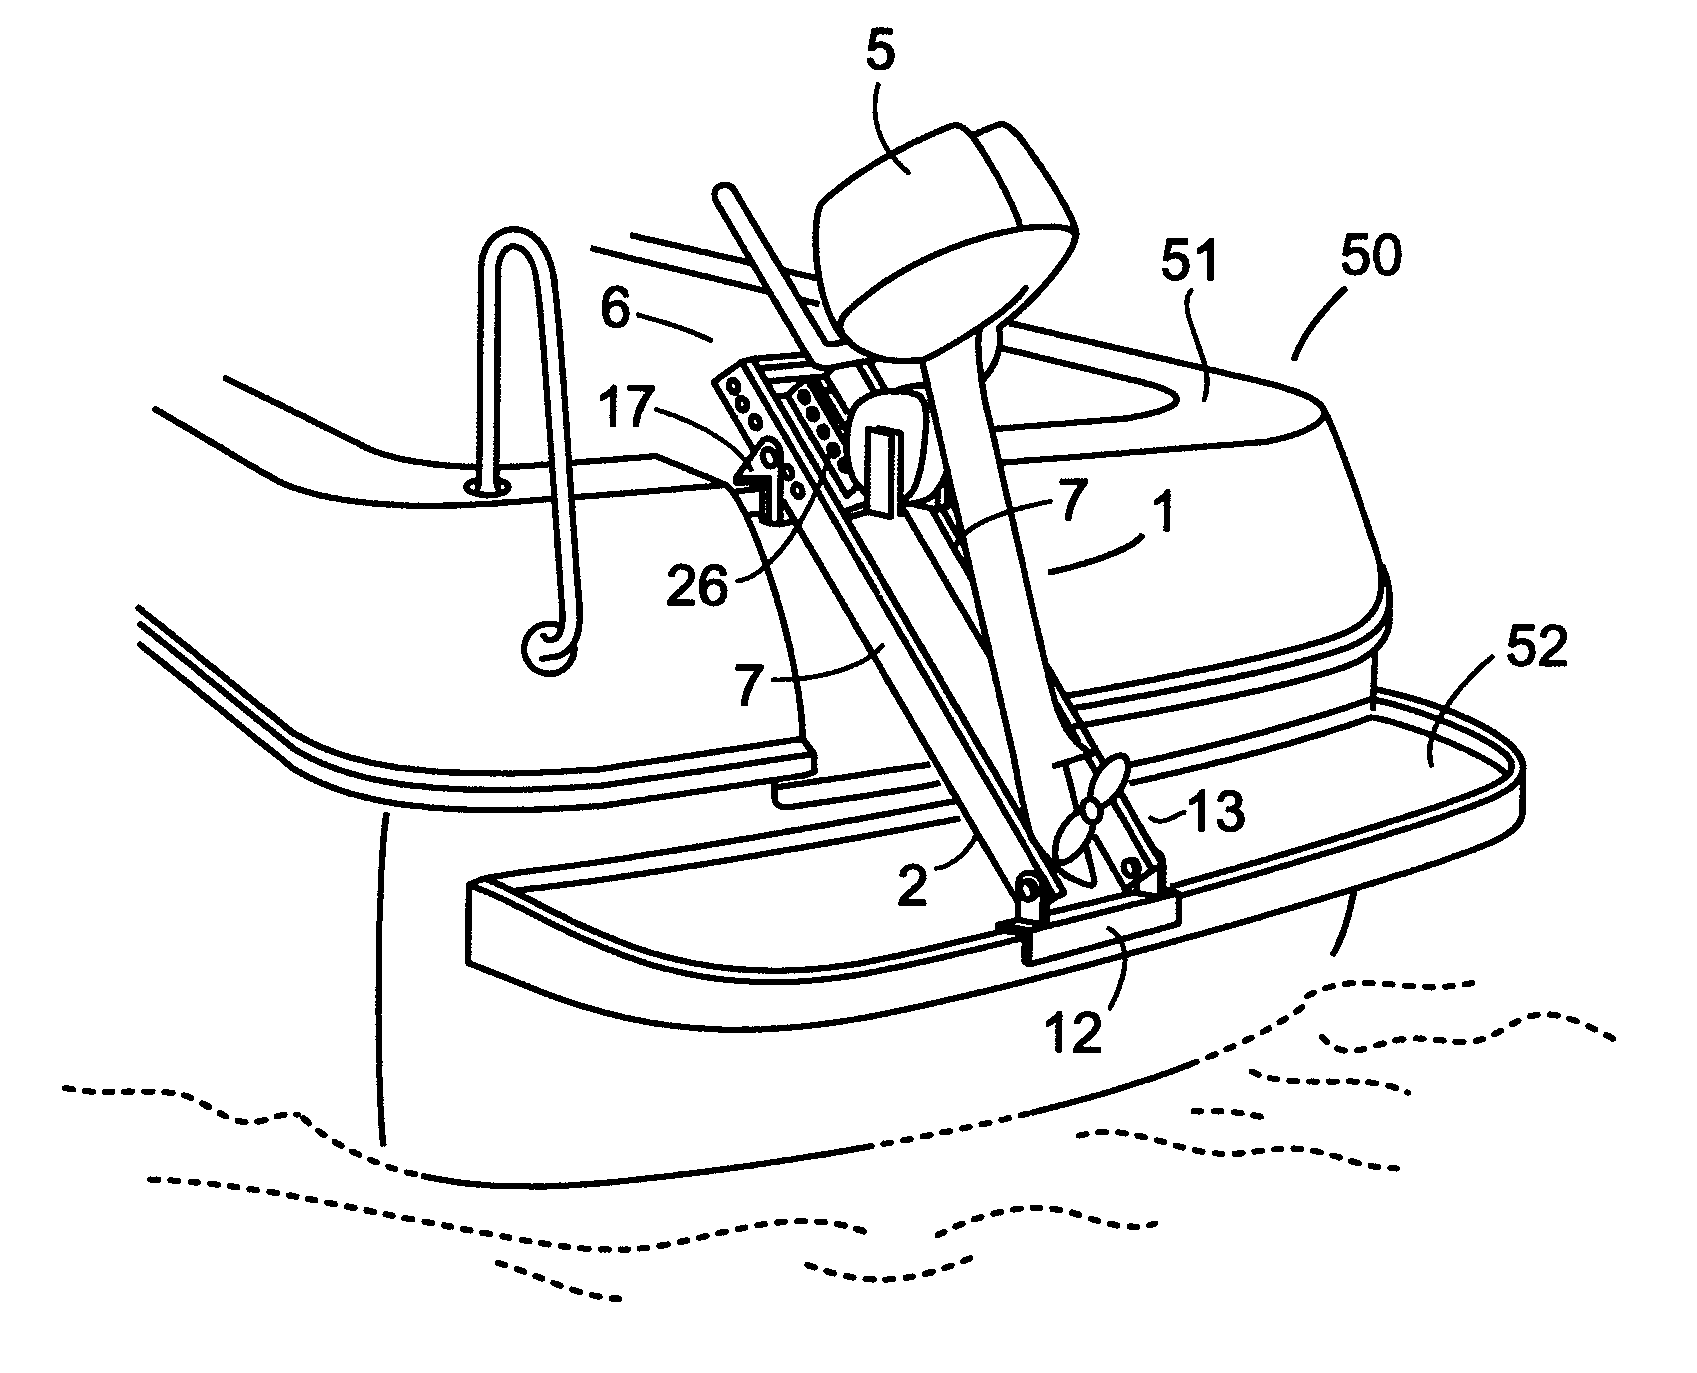 Outboard engine mounting assembly